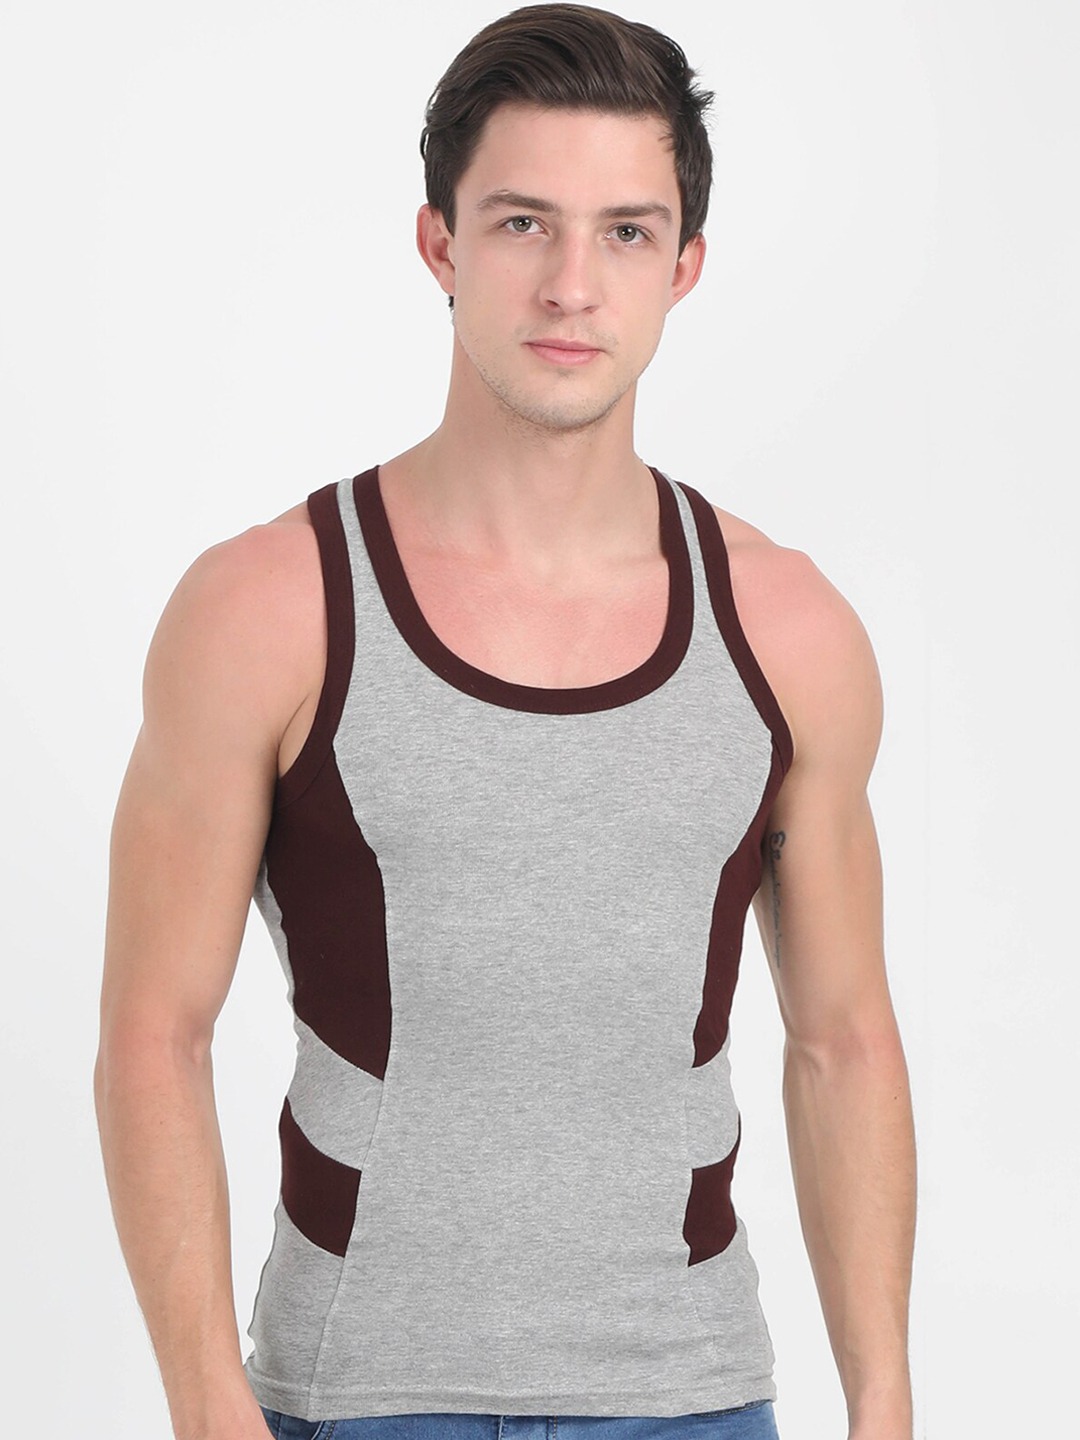 Clothing Innerwear Vests | Genx Men Assorted Pack of 4 Colourblocked Cotton Gym Vests - QD06157